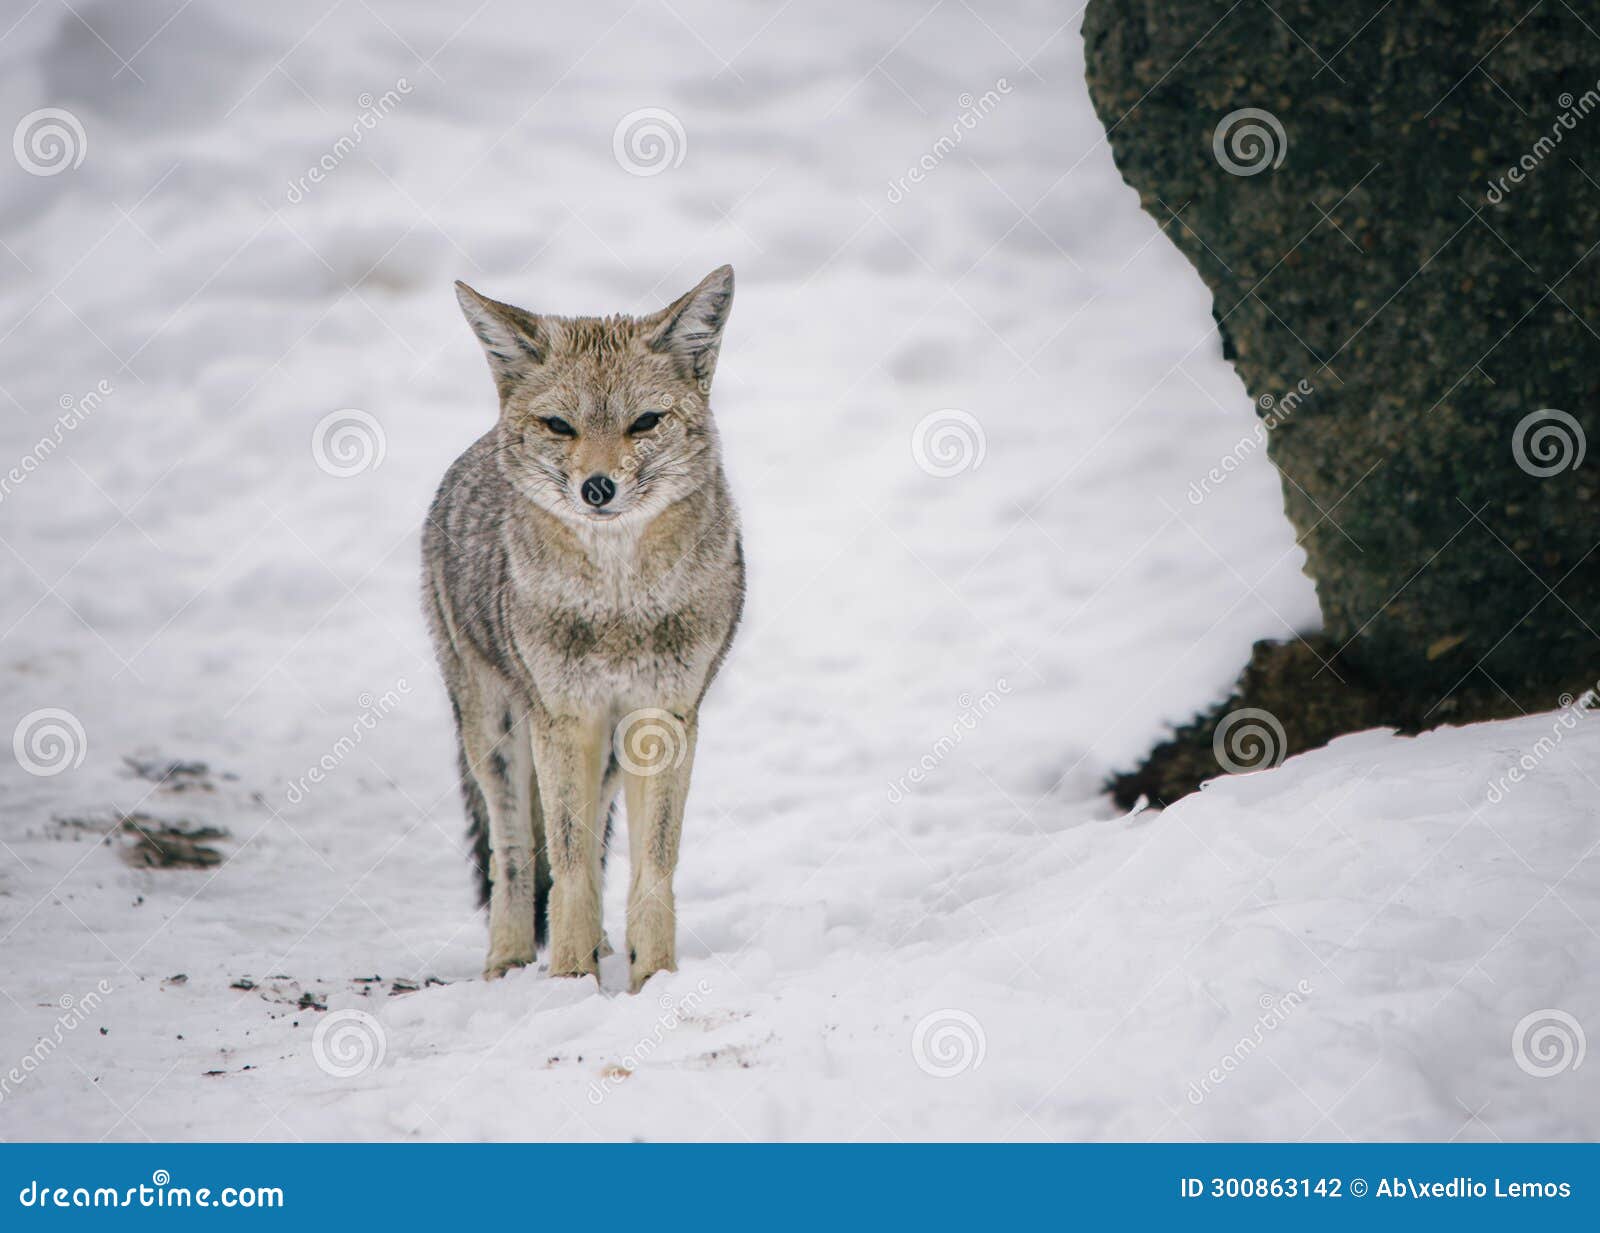 a curious south american gray fox on the snow near el calafate, patagonia, argentina